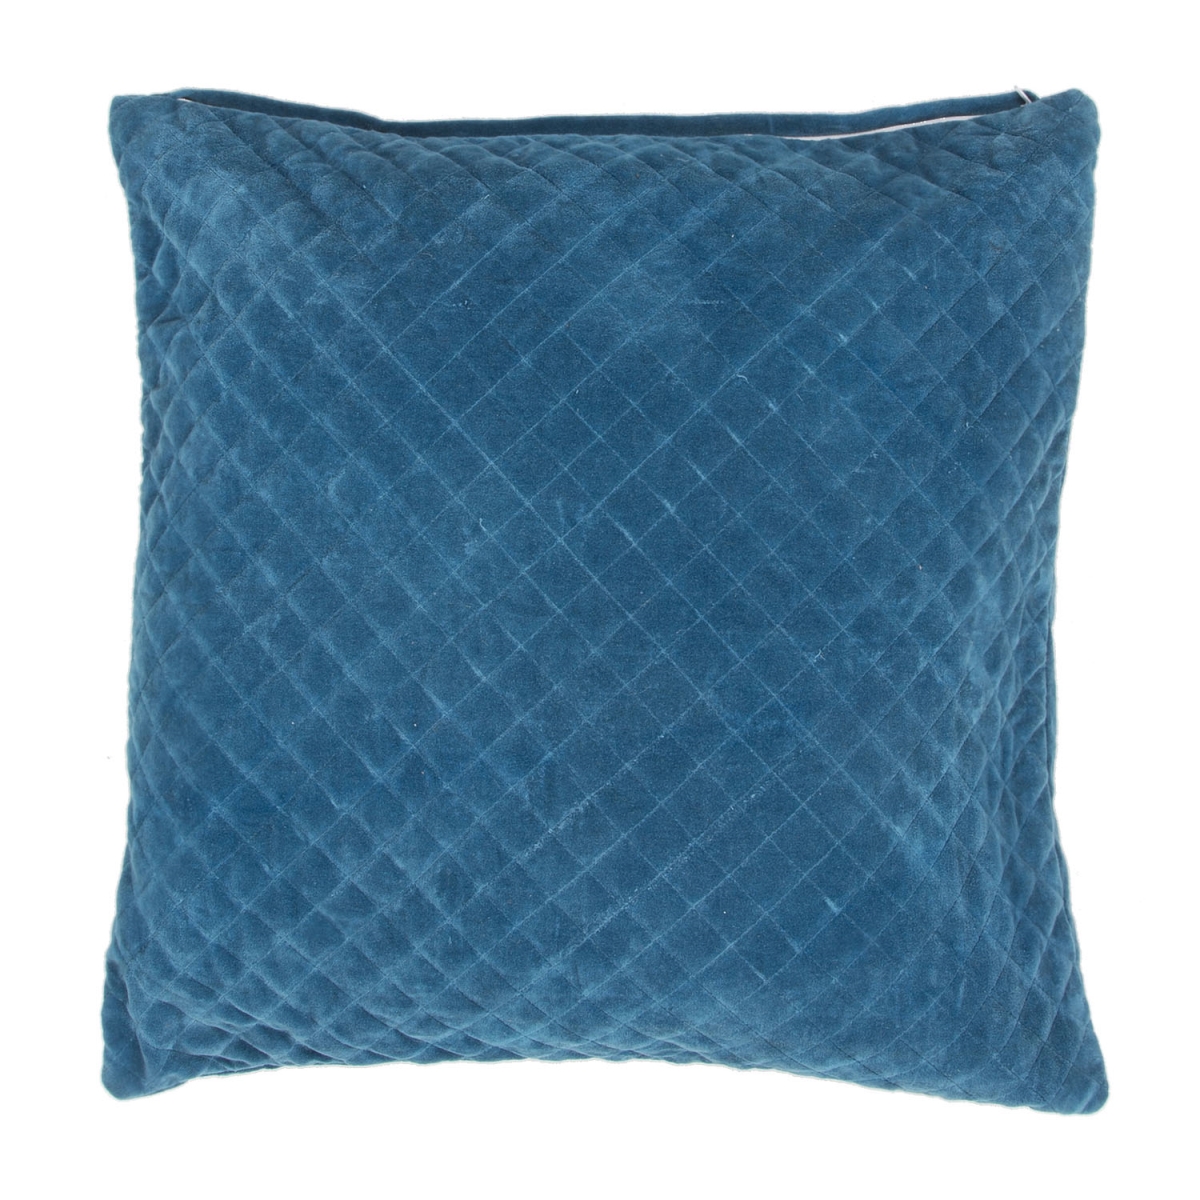 Plw102202 22 X 22 In. Lavish Pillows Posh Blue Solid Poly Throw Pillow